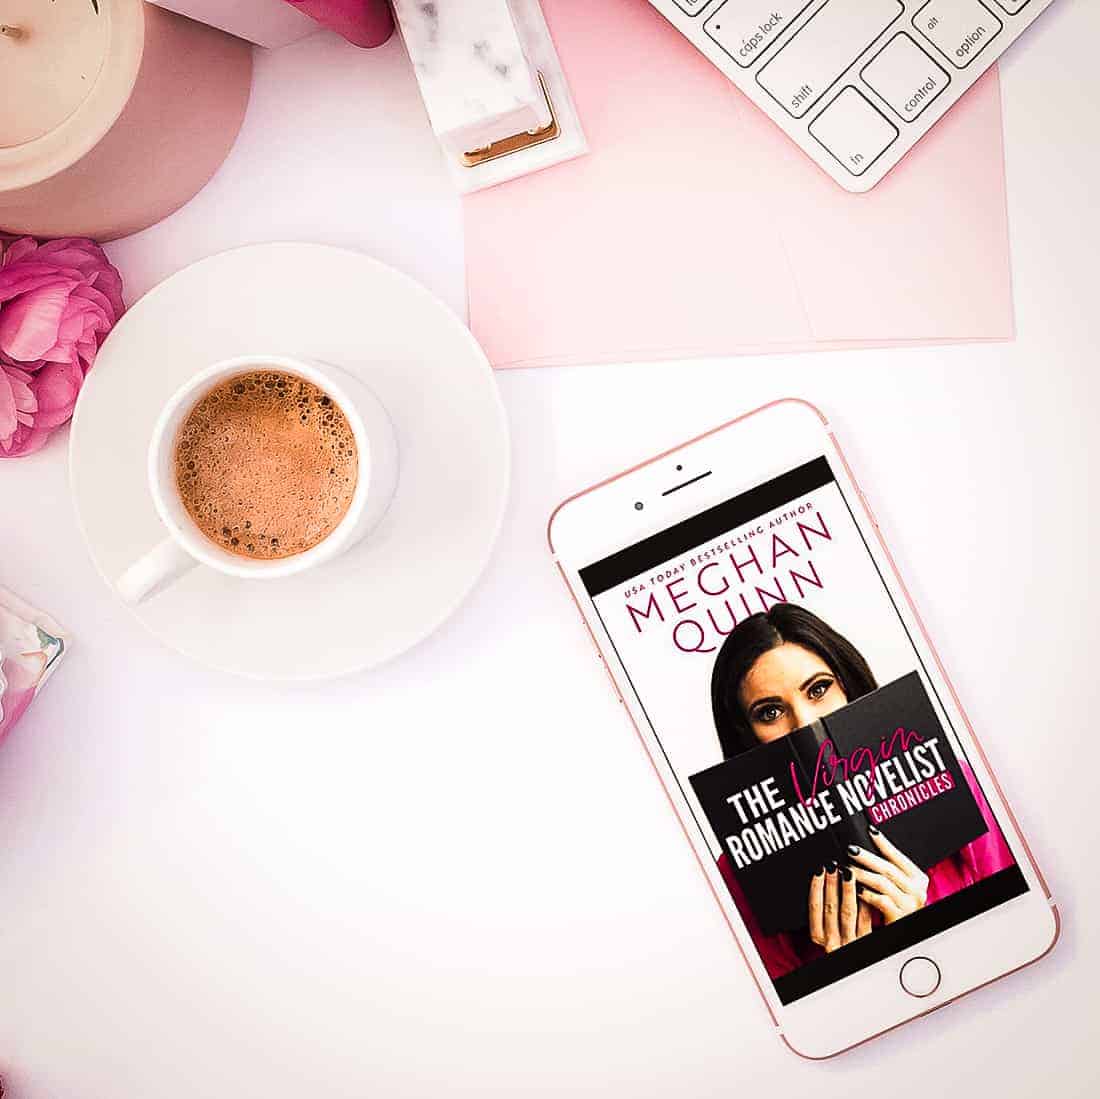 If you liked The Virgin Romance Novelist's over-the-top humor and ridiculous situations, you're going to love The Randy Romance Novelist by Meghan Quinn!